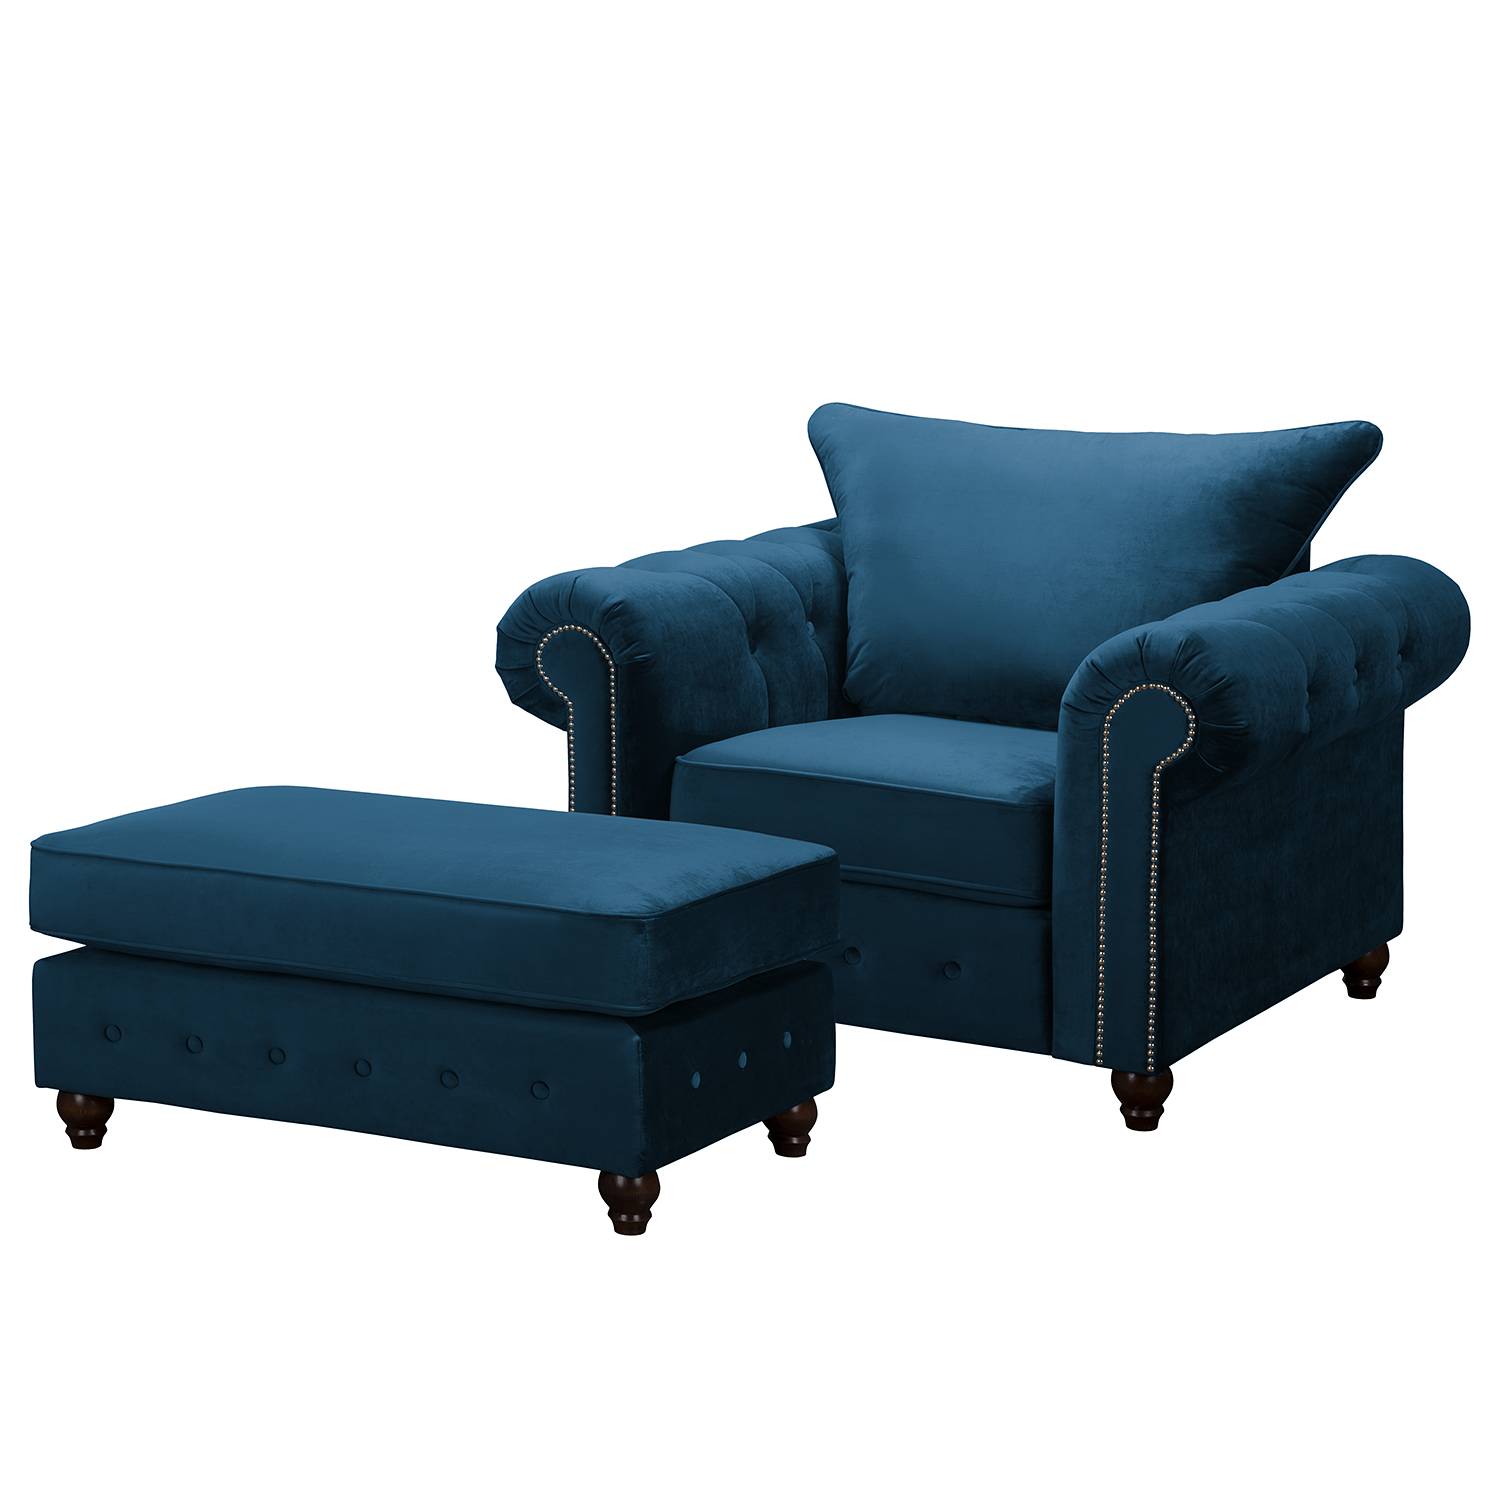 Image of Fauteuil Solita 000000001000135713